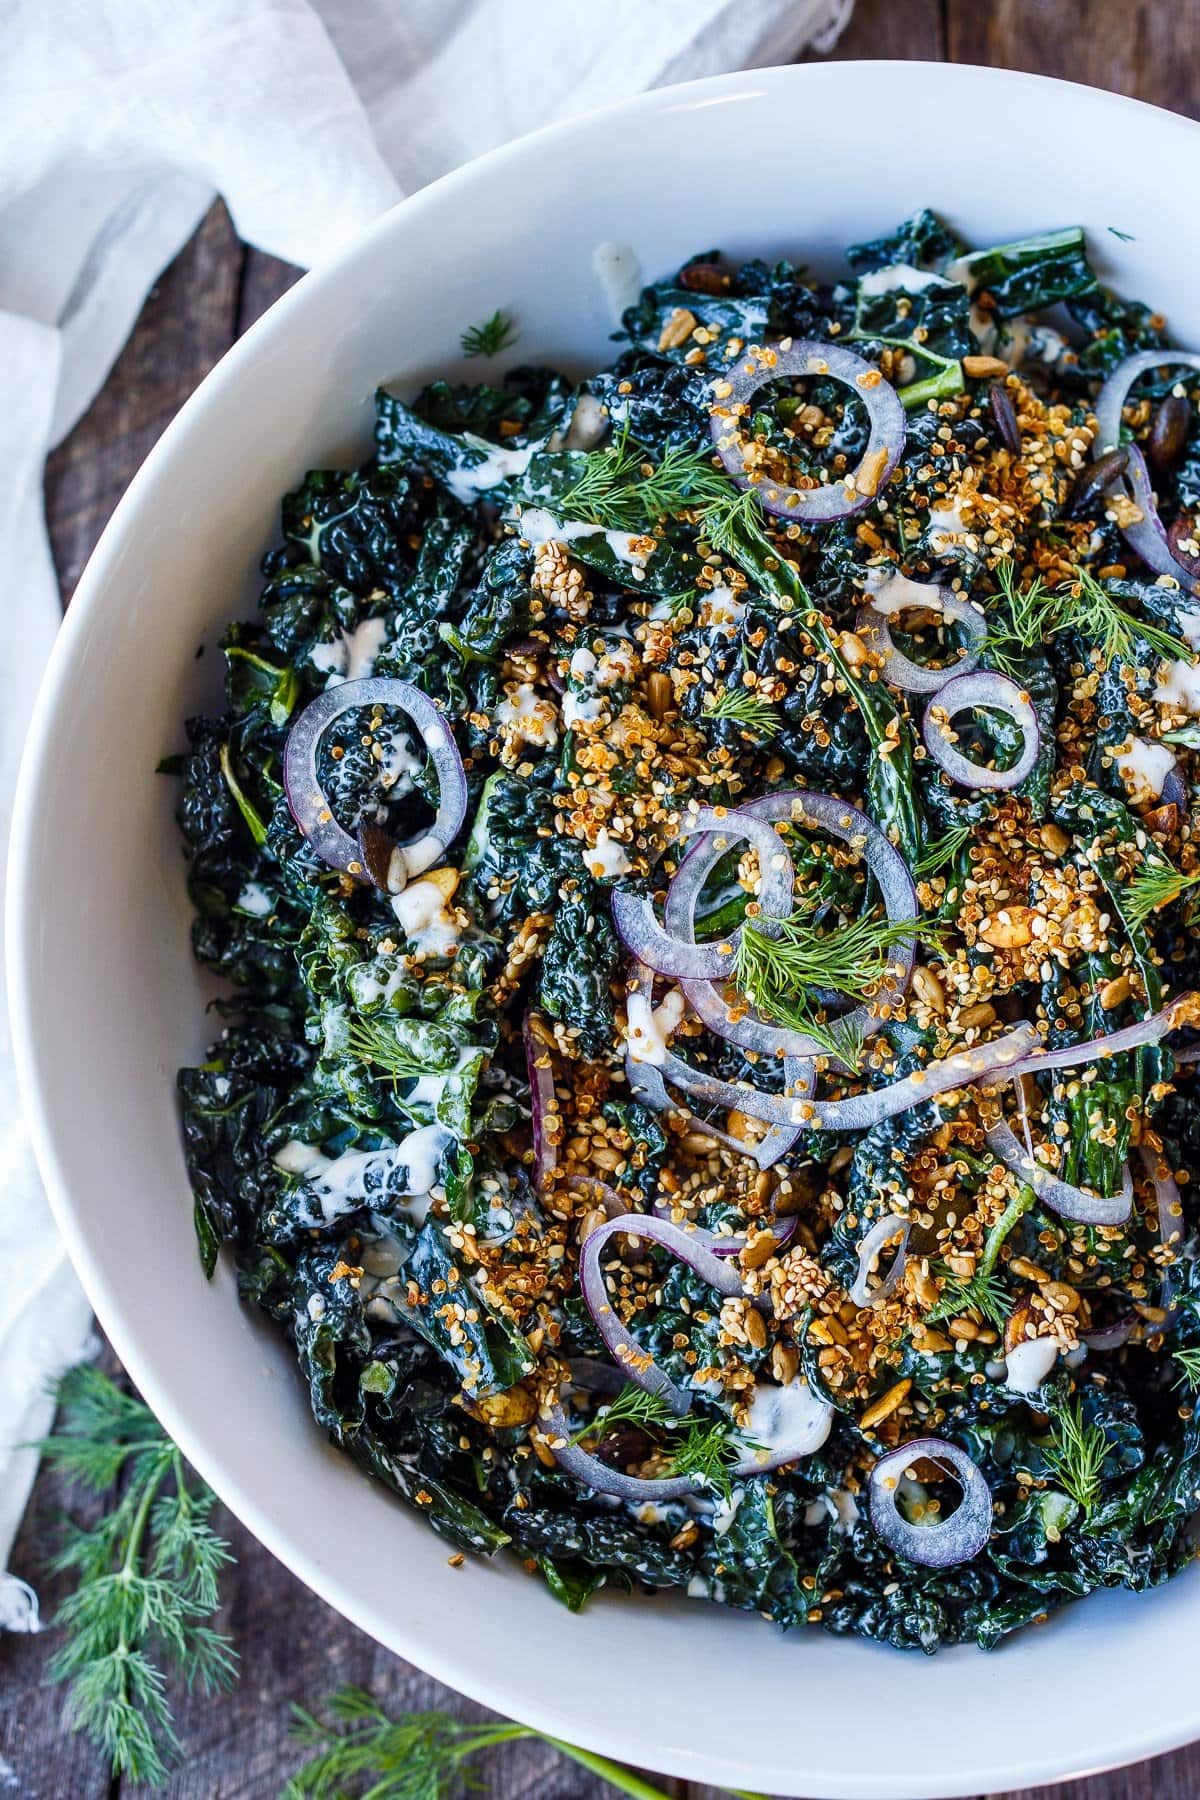 Kale Salad with red onions, herbs, buttermilk dressing and crunchy salad topper. 